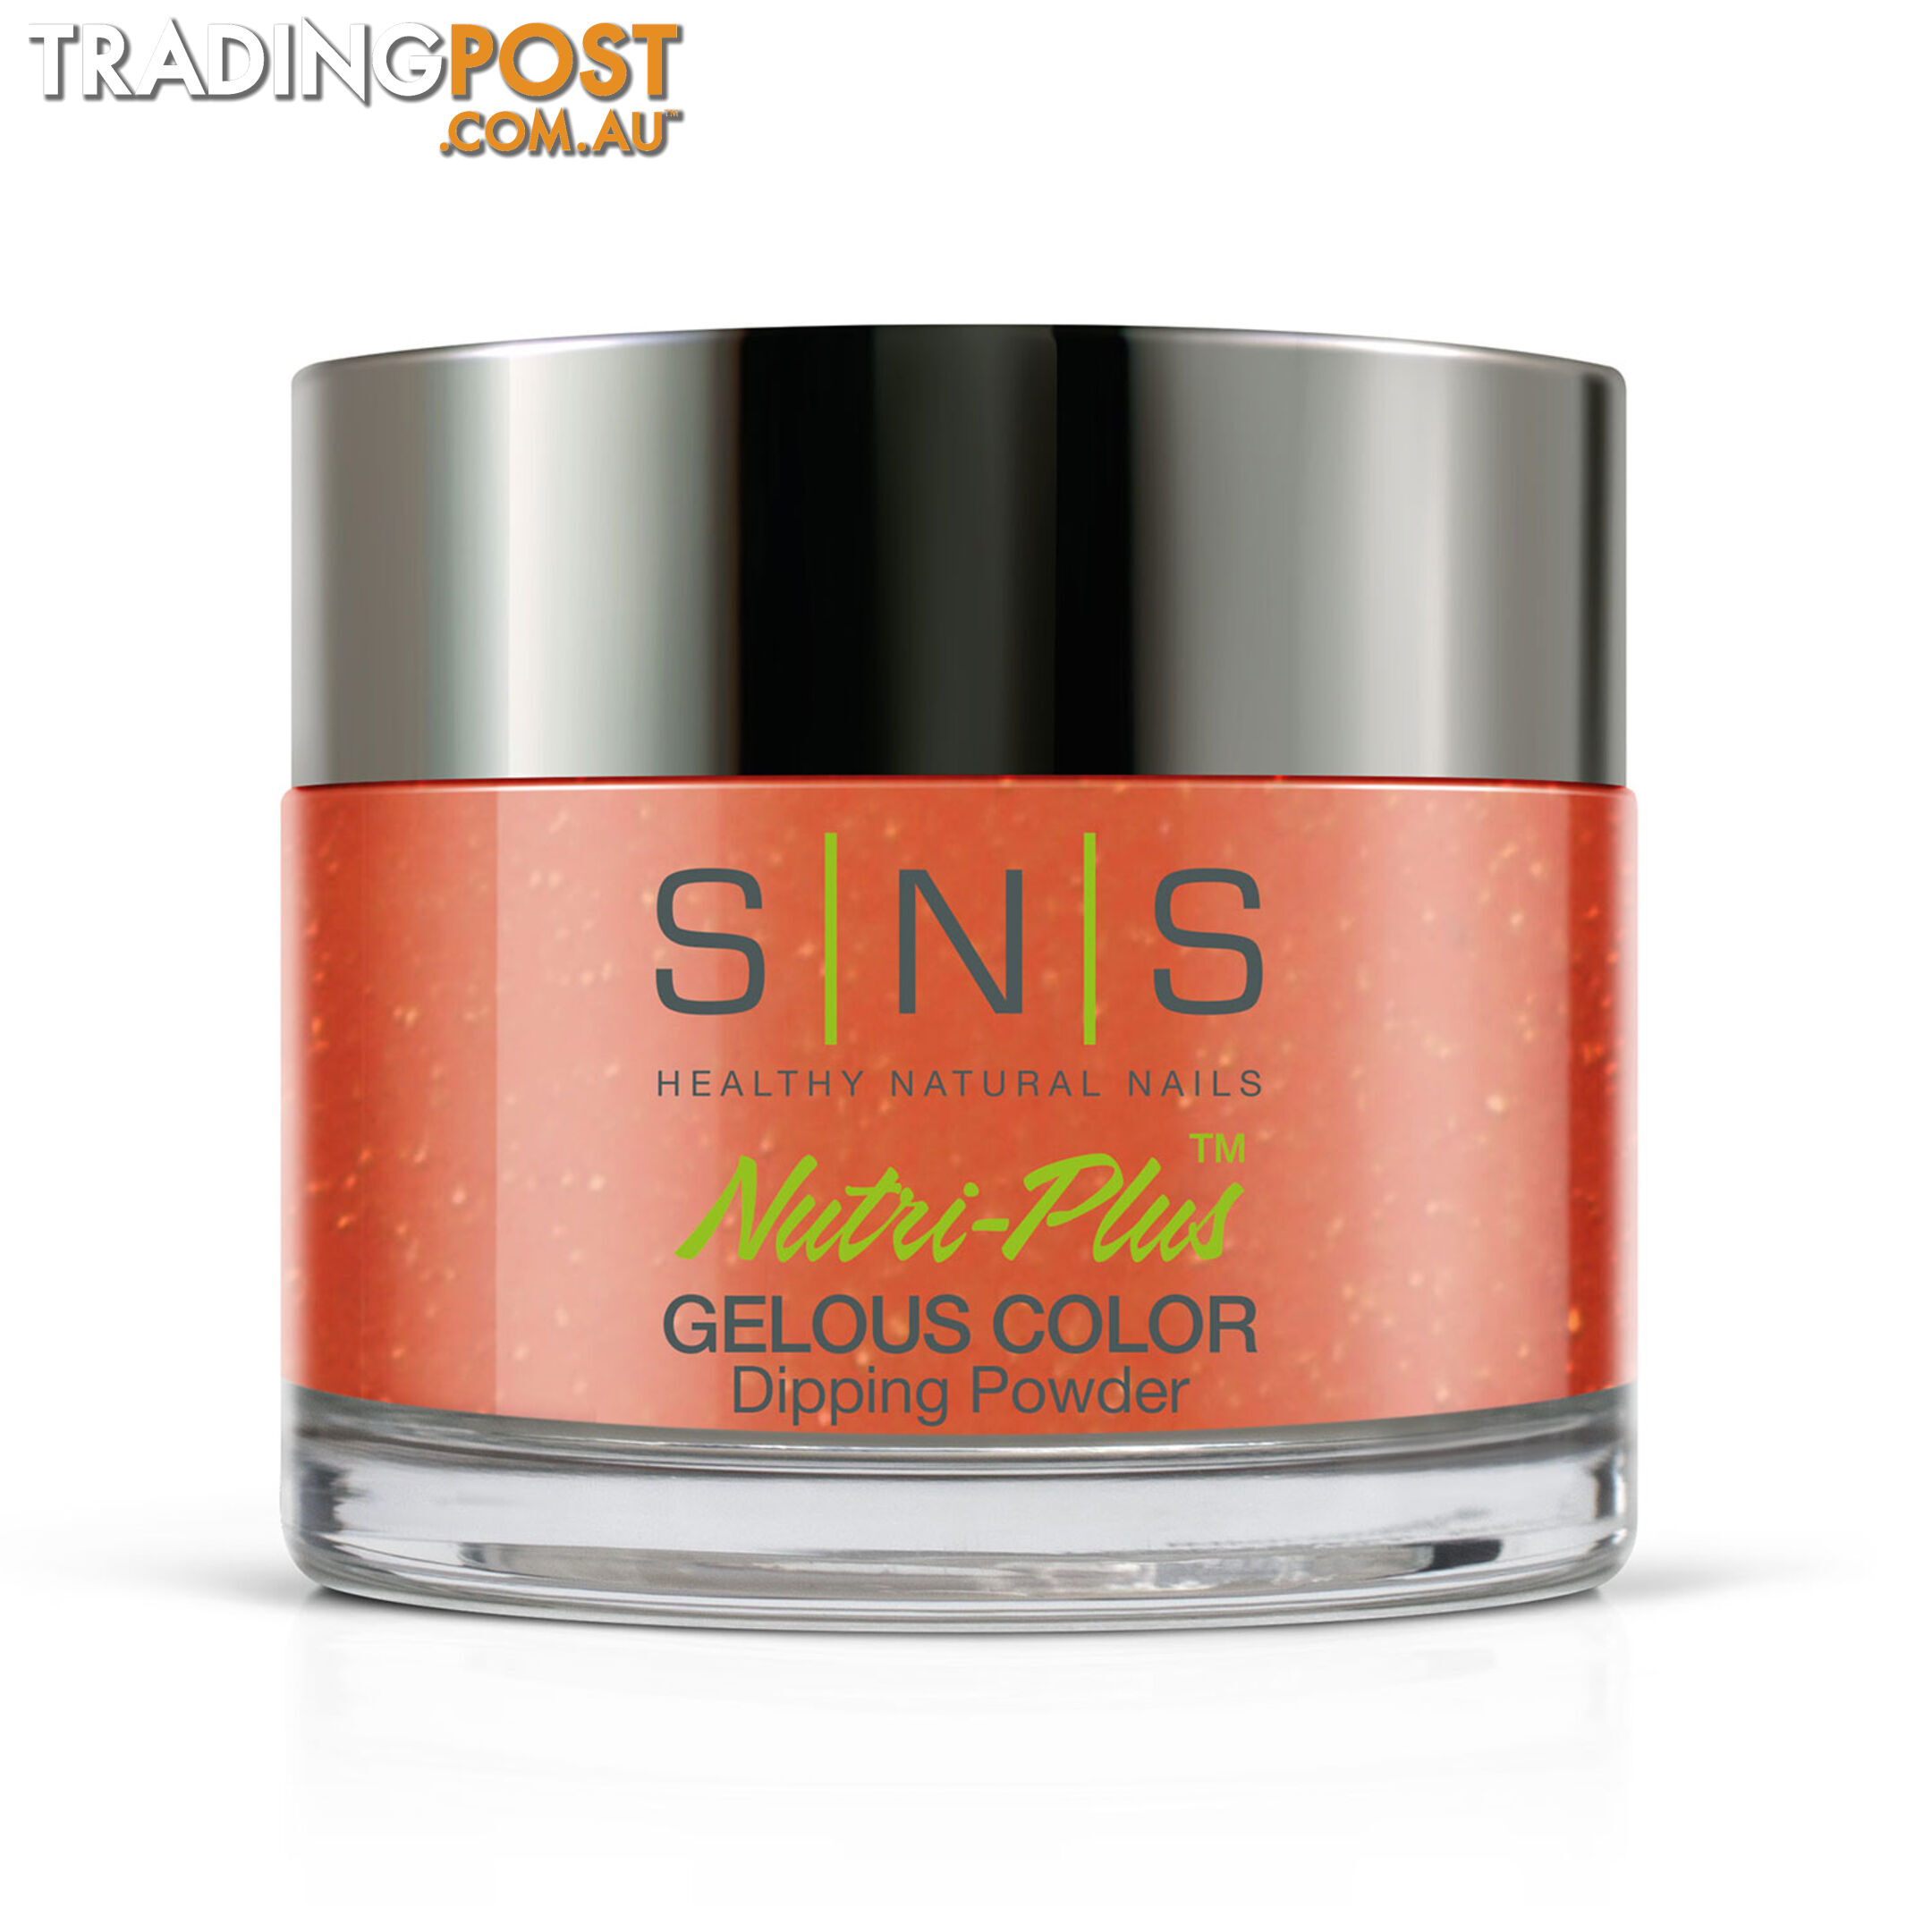 SNS HM21 Gelous Dipping Powder 43g (1.5oz) Lychee you later - 655302844922